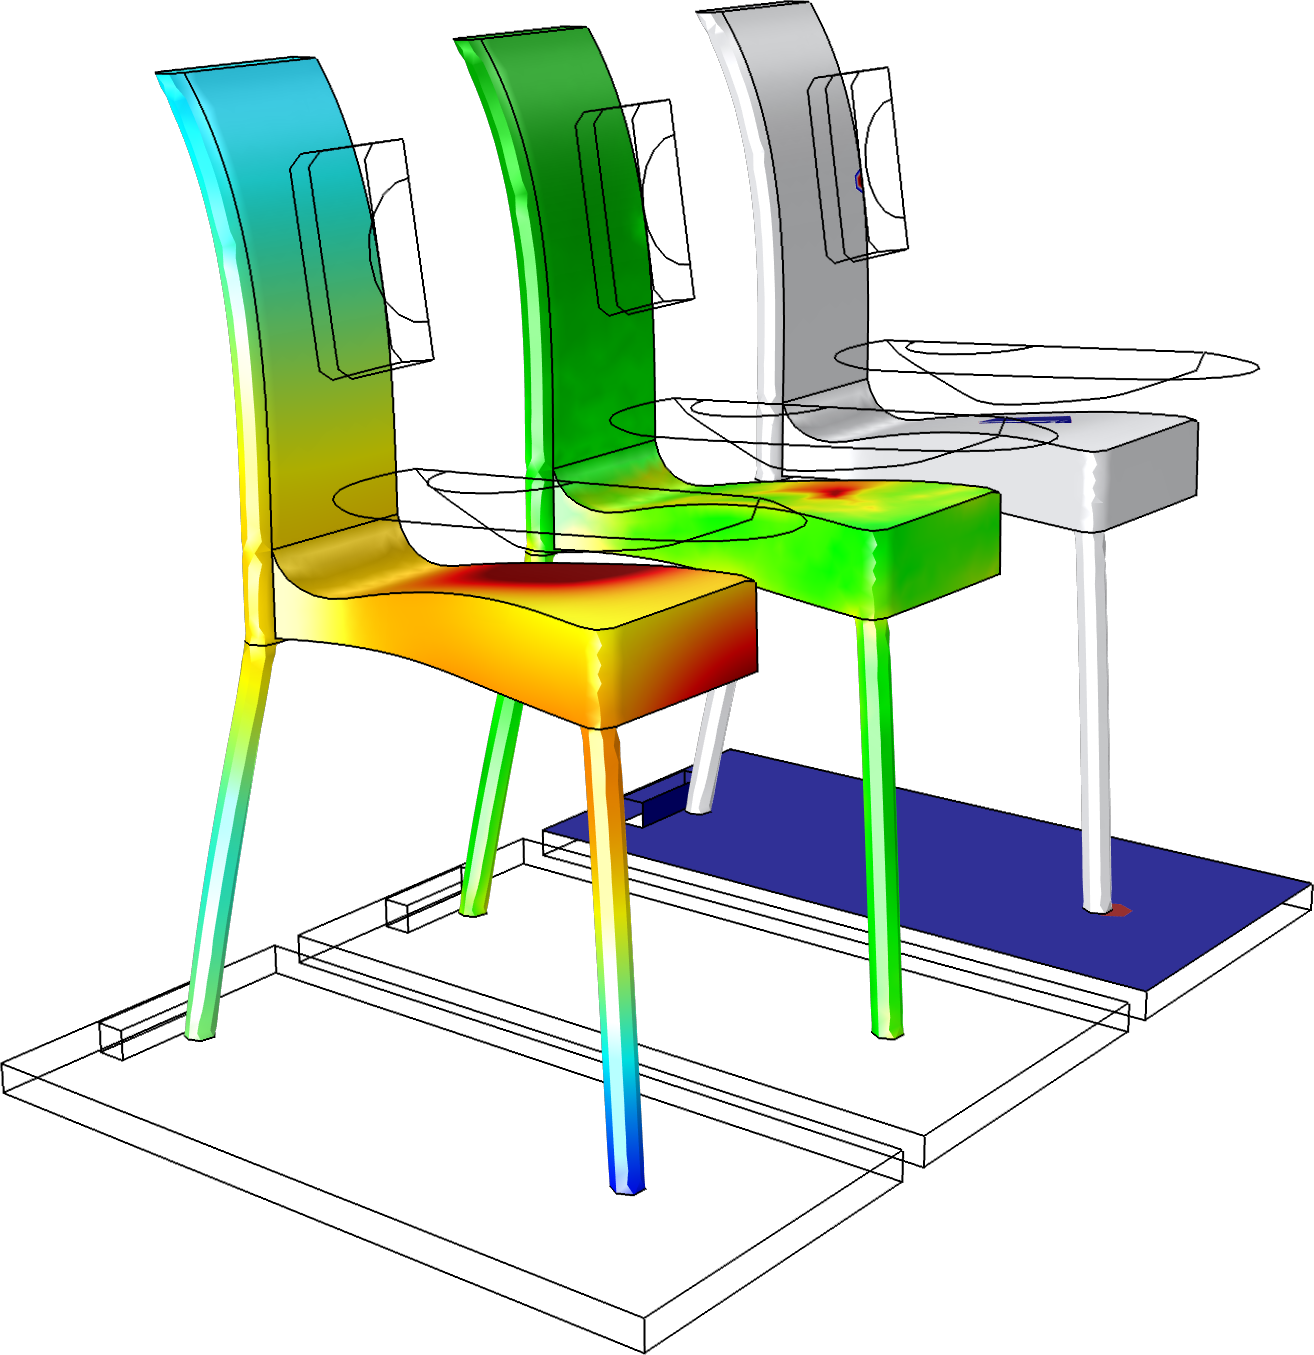 Simulation software and furniture testing 